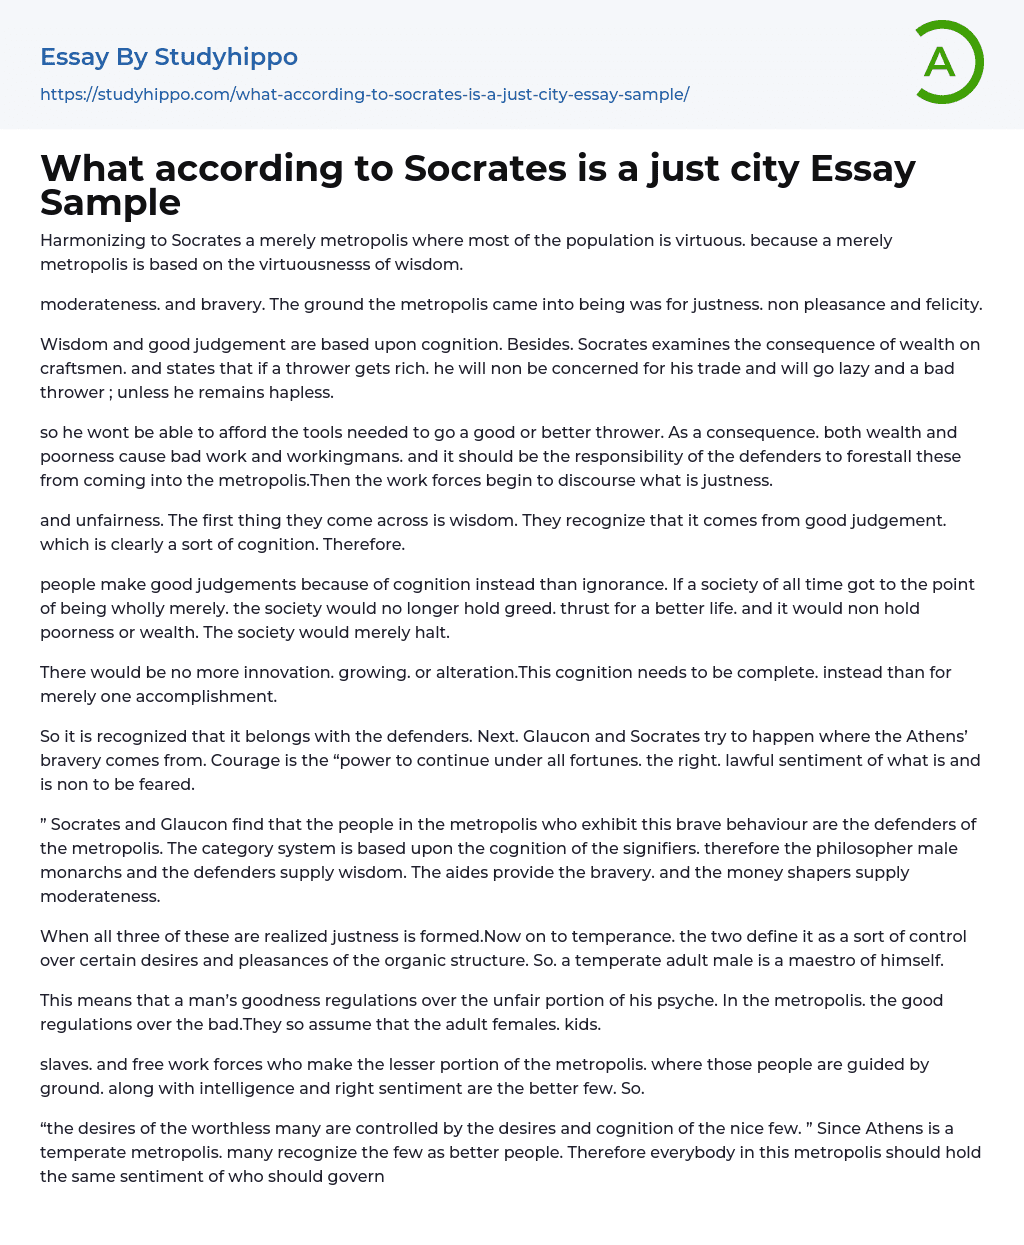 What according to Socrates is a just city Essay Sample